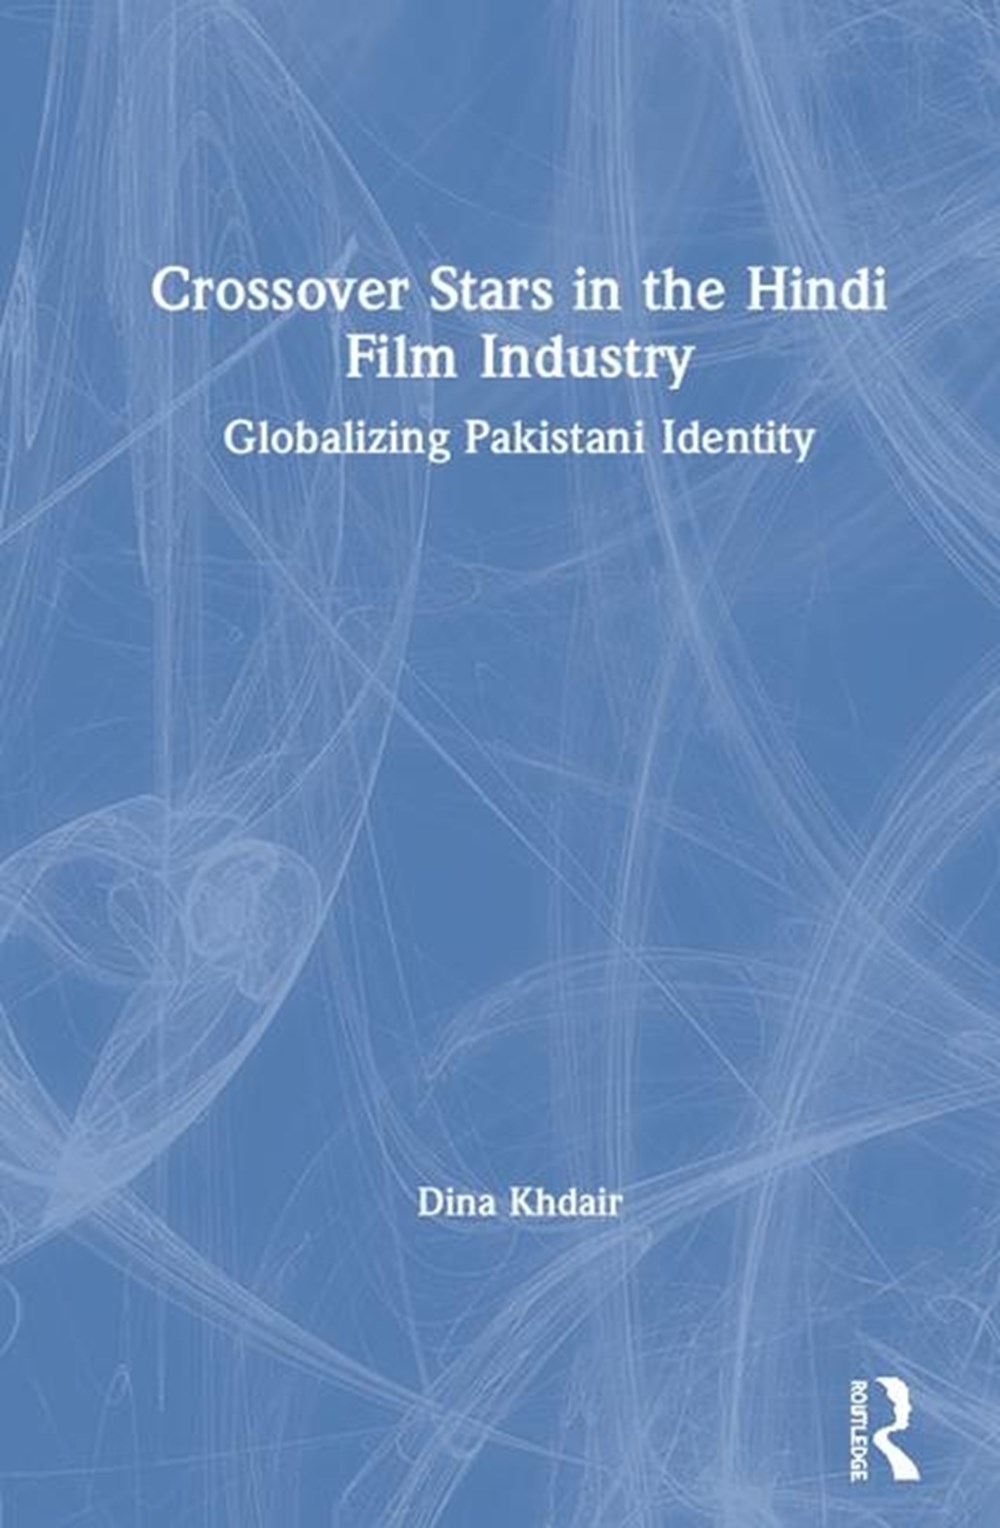 Crossover Stars in the Hindi Film Industry: Globalizing Pakistani Identity